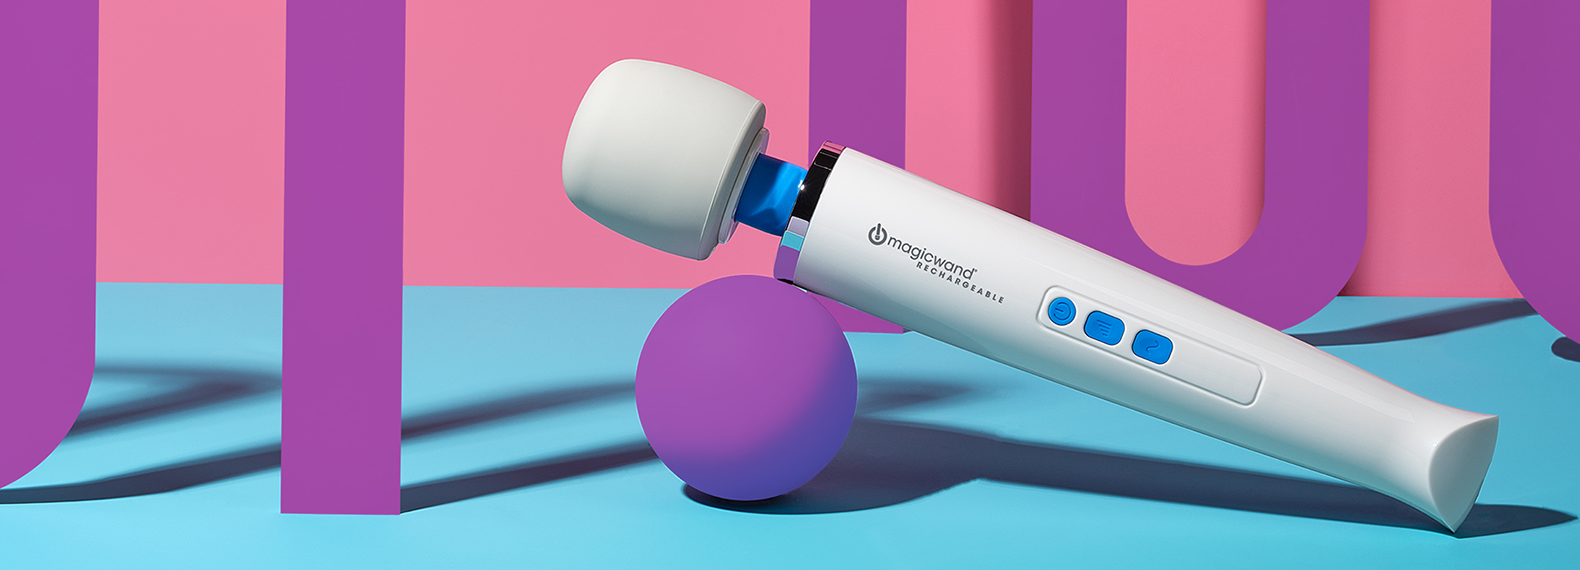 MagicWand Rechargeable